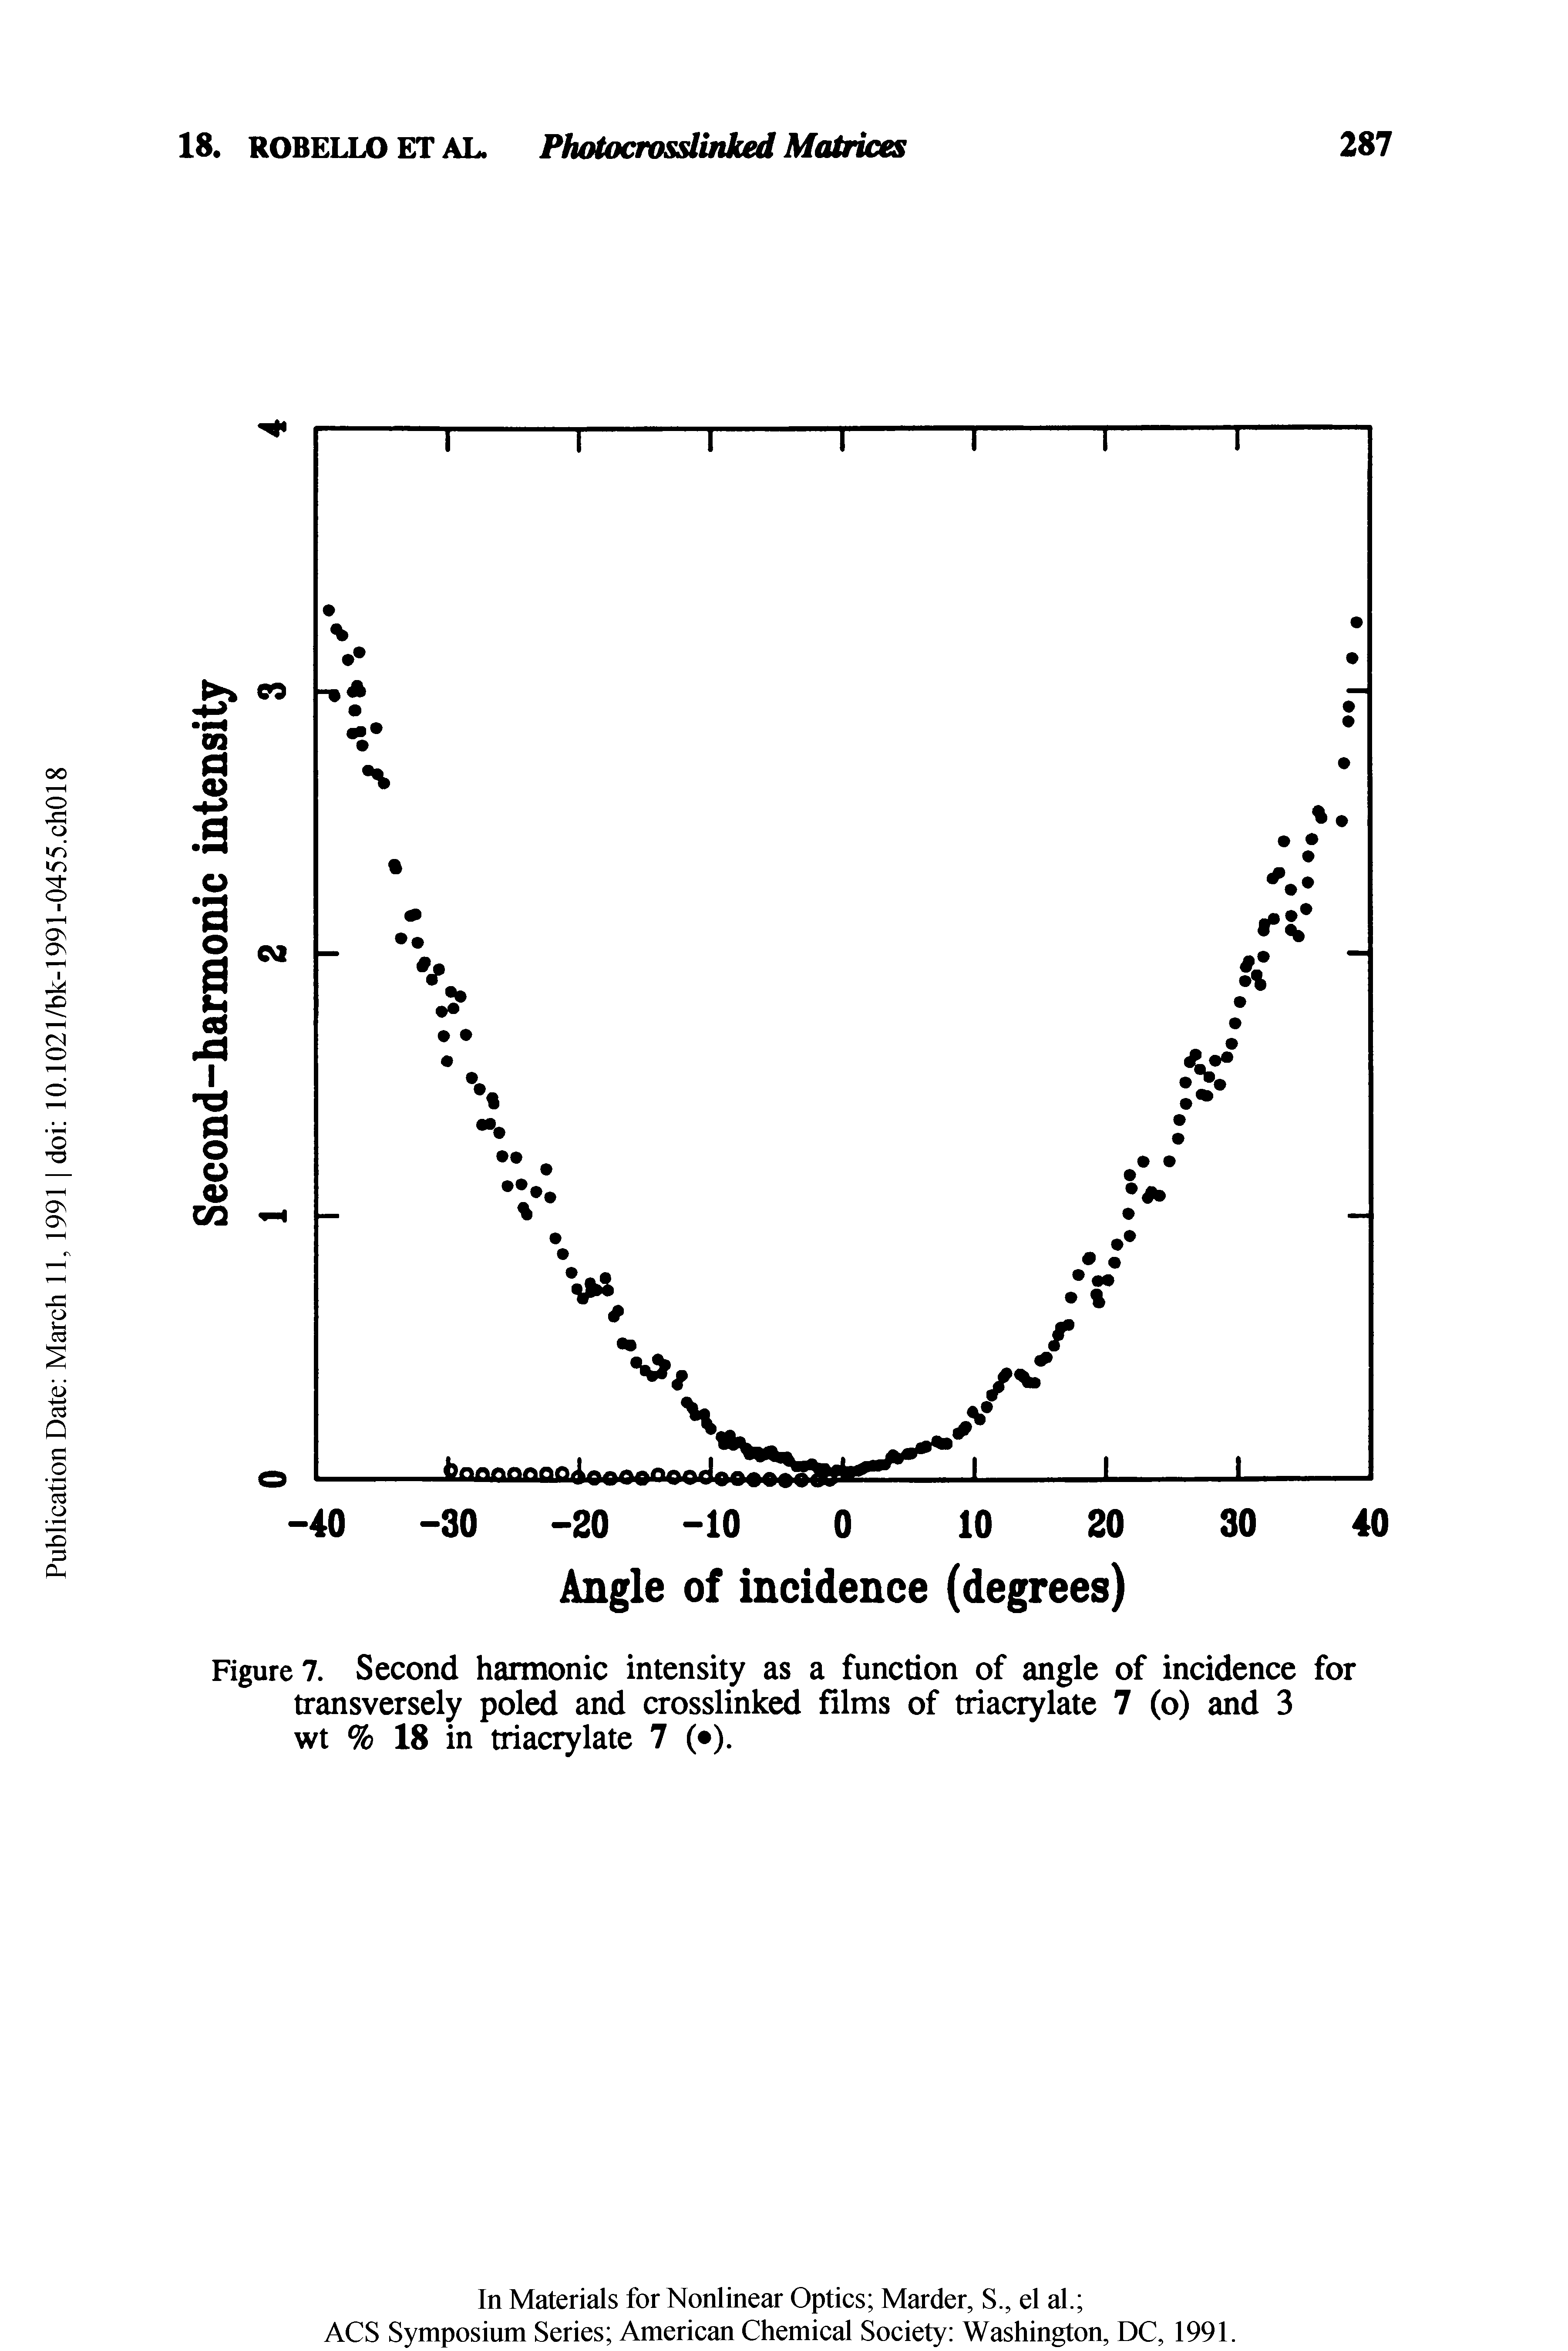 Figure 7. Second harmonic intensity as a function of angle of incidence for transversely poled and crosslinked films of triacrylate 7 (o) and 3 wt % 18 in triacrylate 7 ( ).